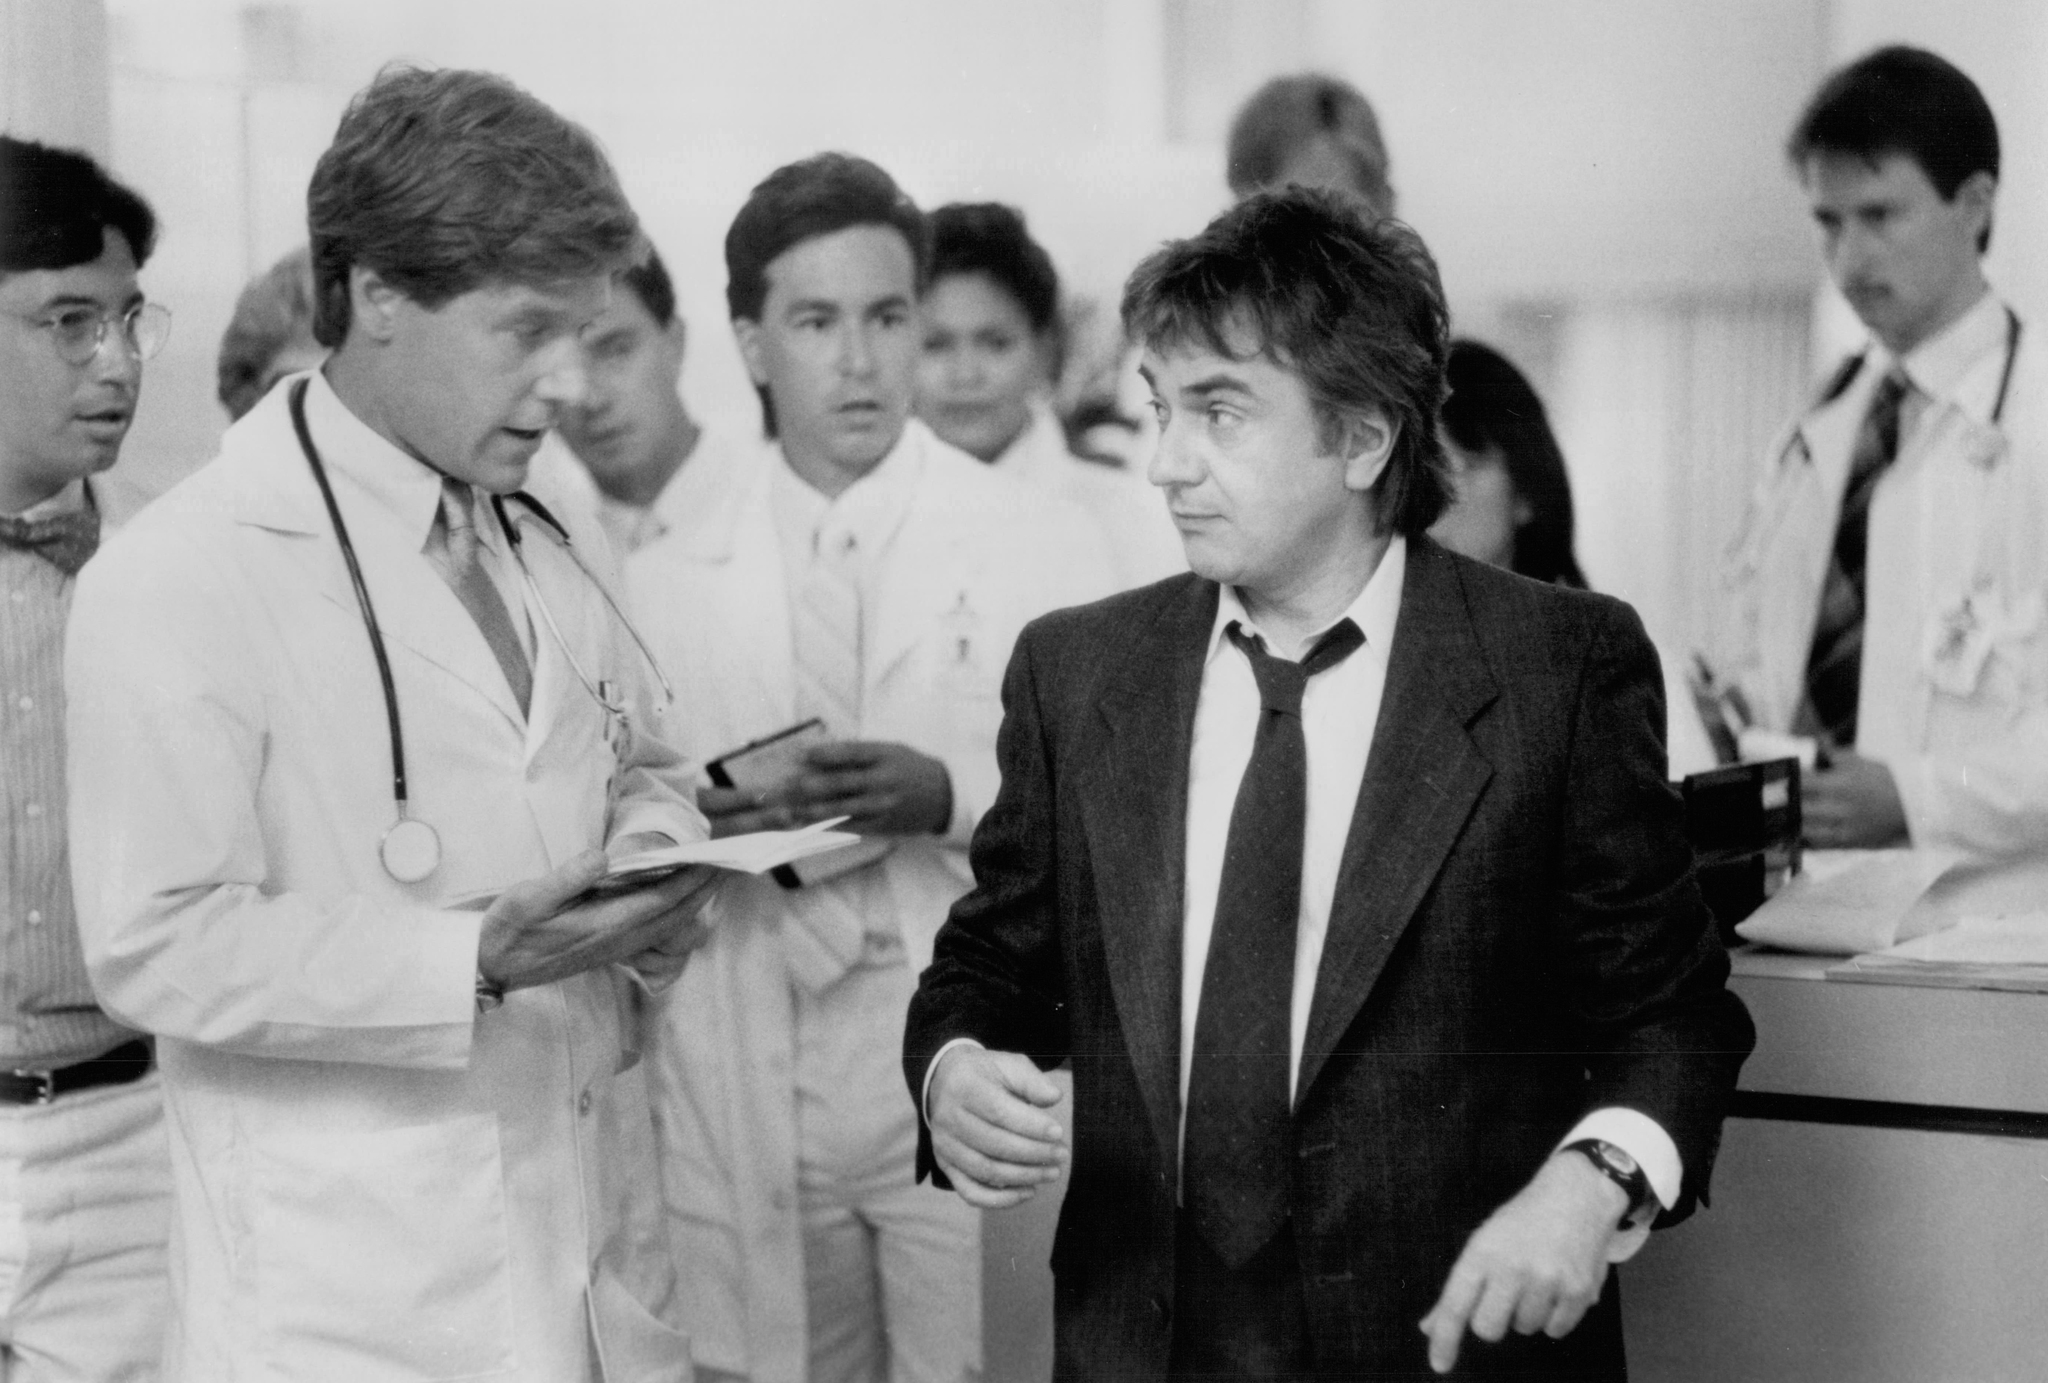 Still of Dudley Moore in Like Father Like Son (1987)